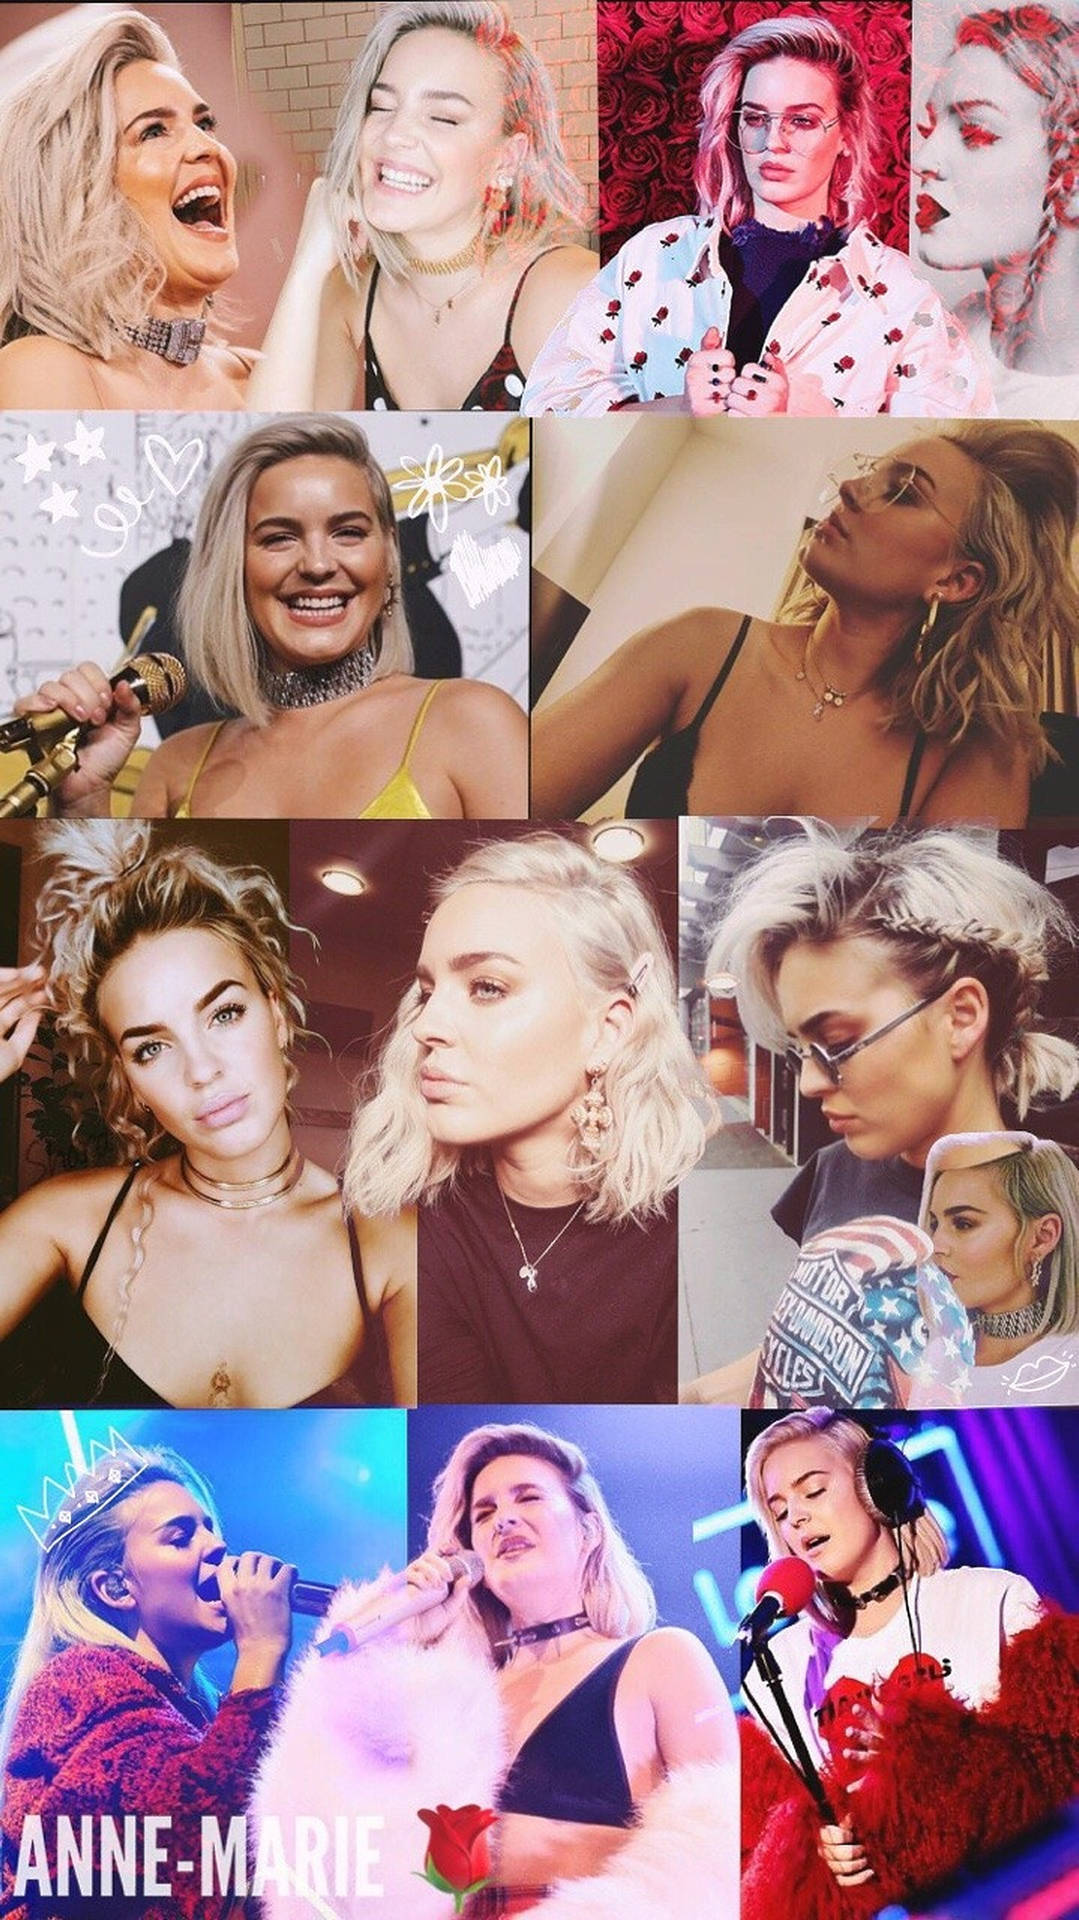 Anne-marie Collage